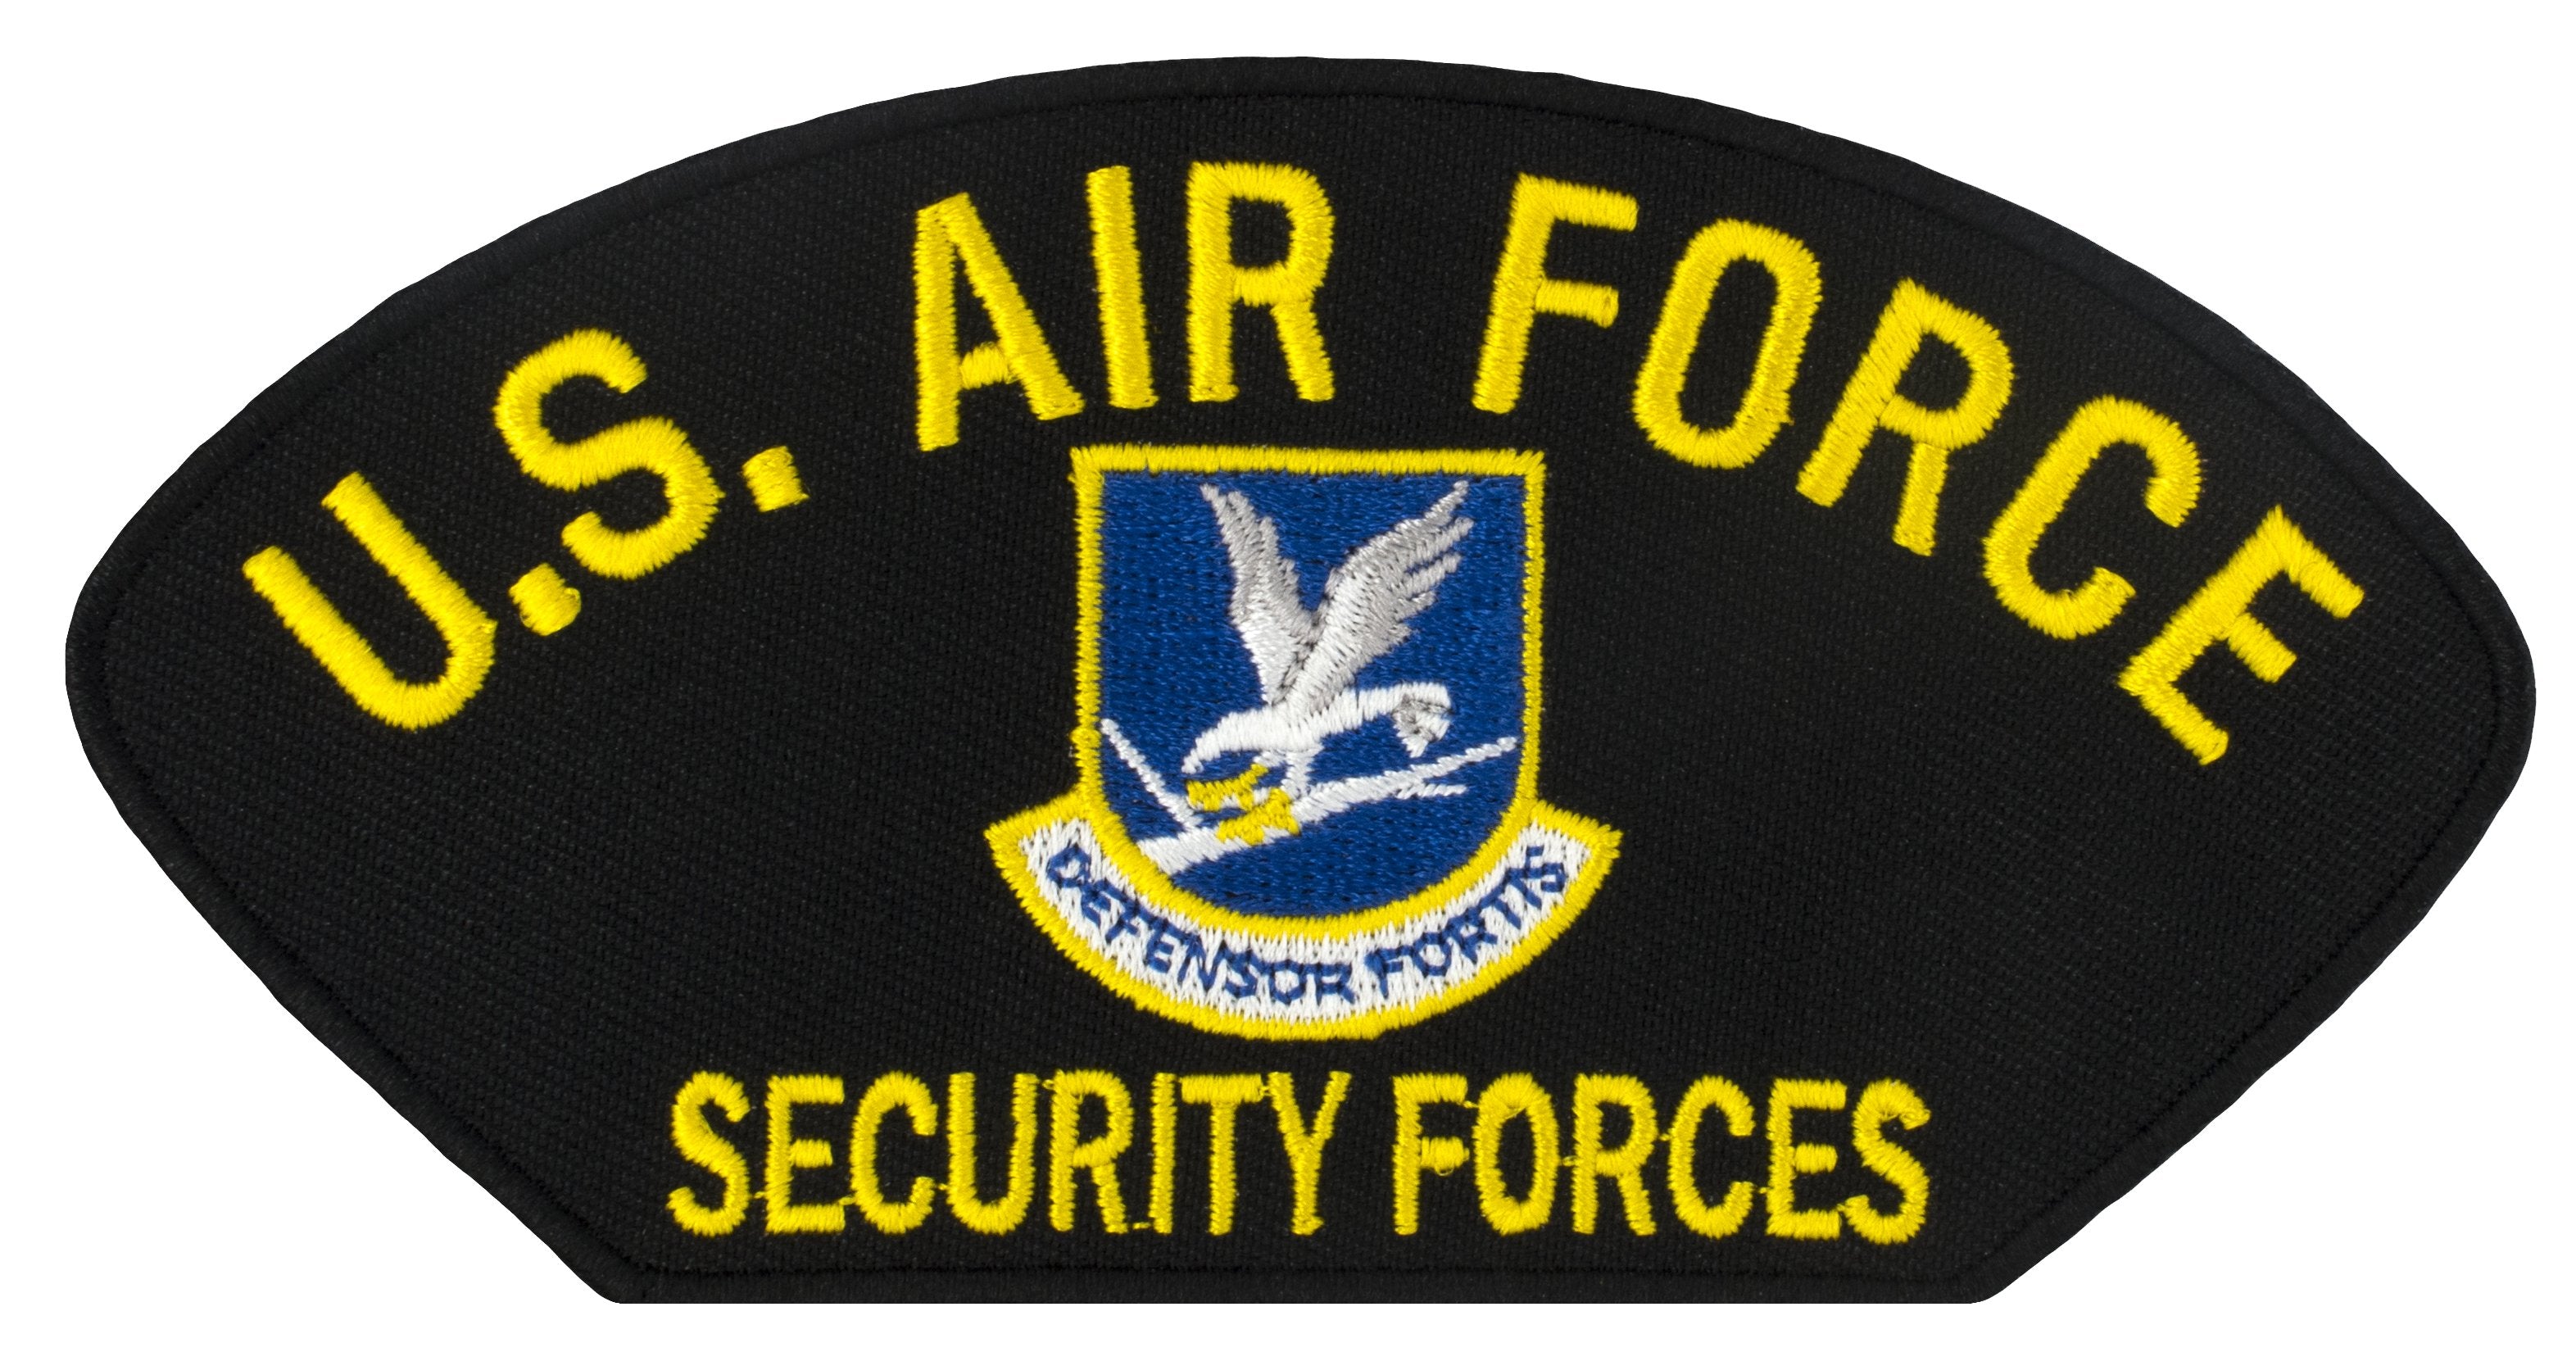 US Air Force Security Forces Embroidered Patch 5 3/16" x 2 5/8"